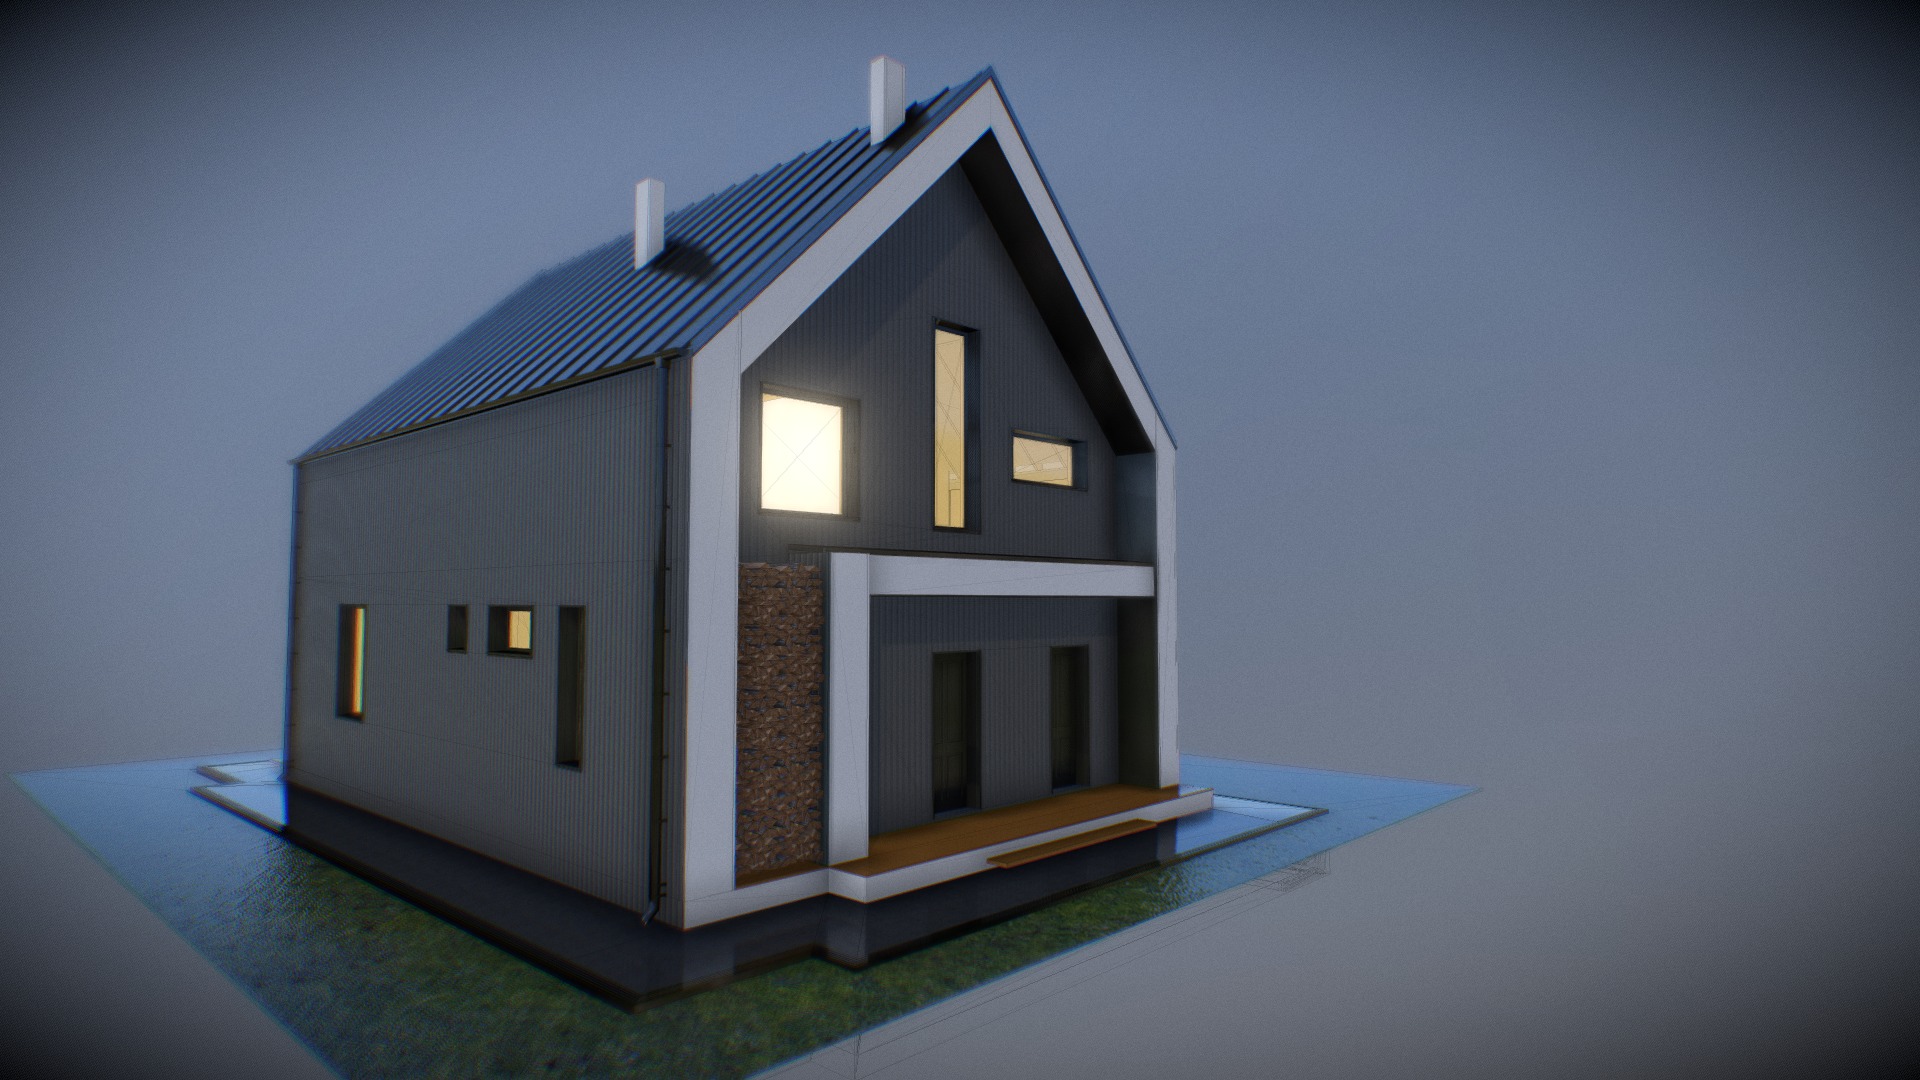 3D model Smart6 Karkas - This is a 3D model of the Smart6 Karkas. The 3D model is about a house with a pool.